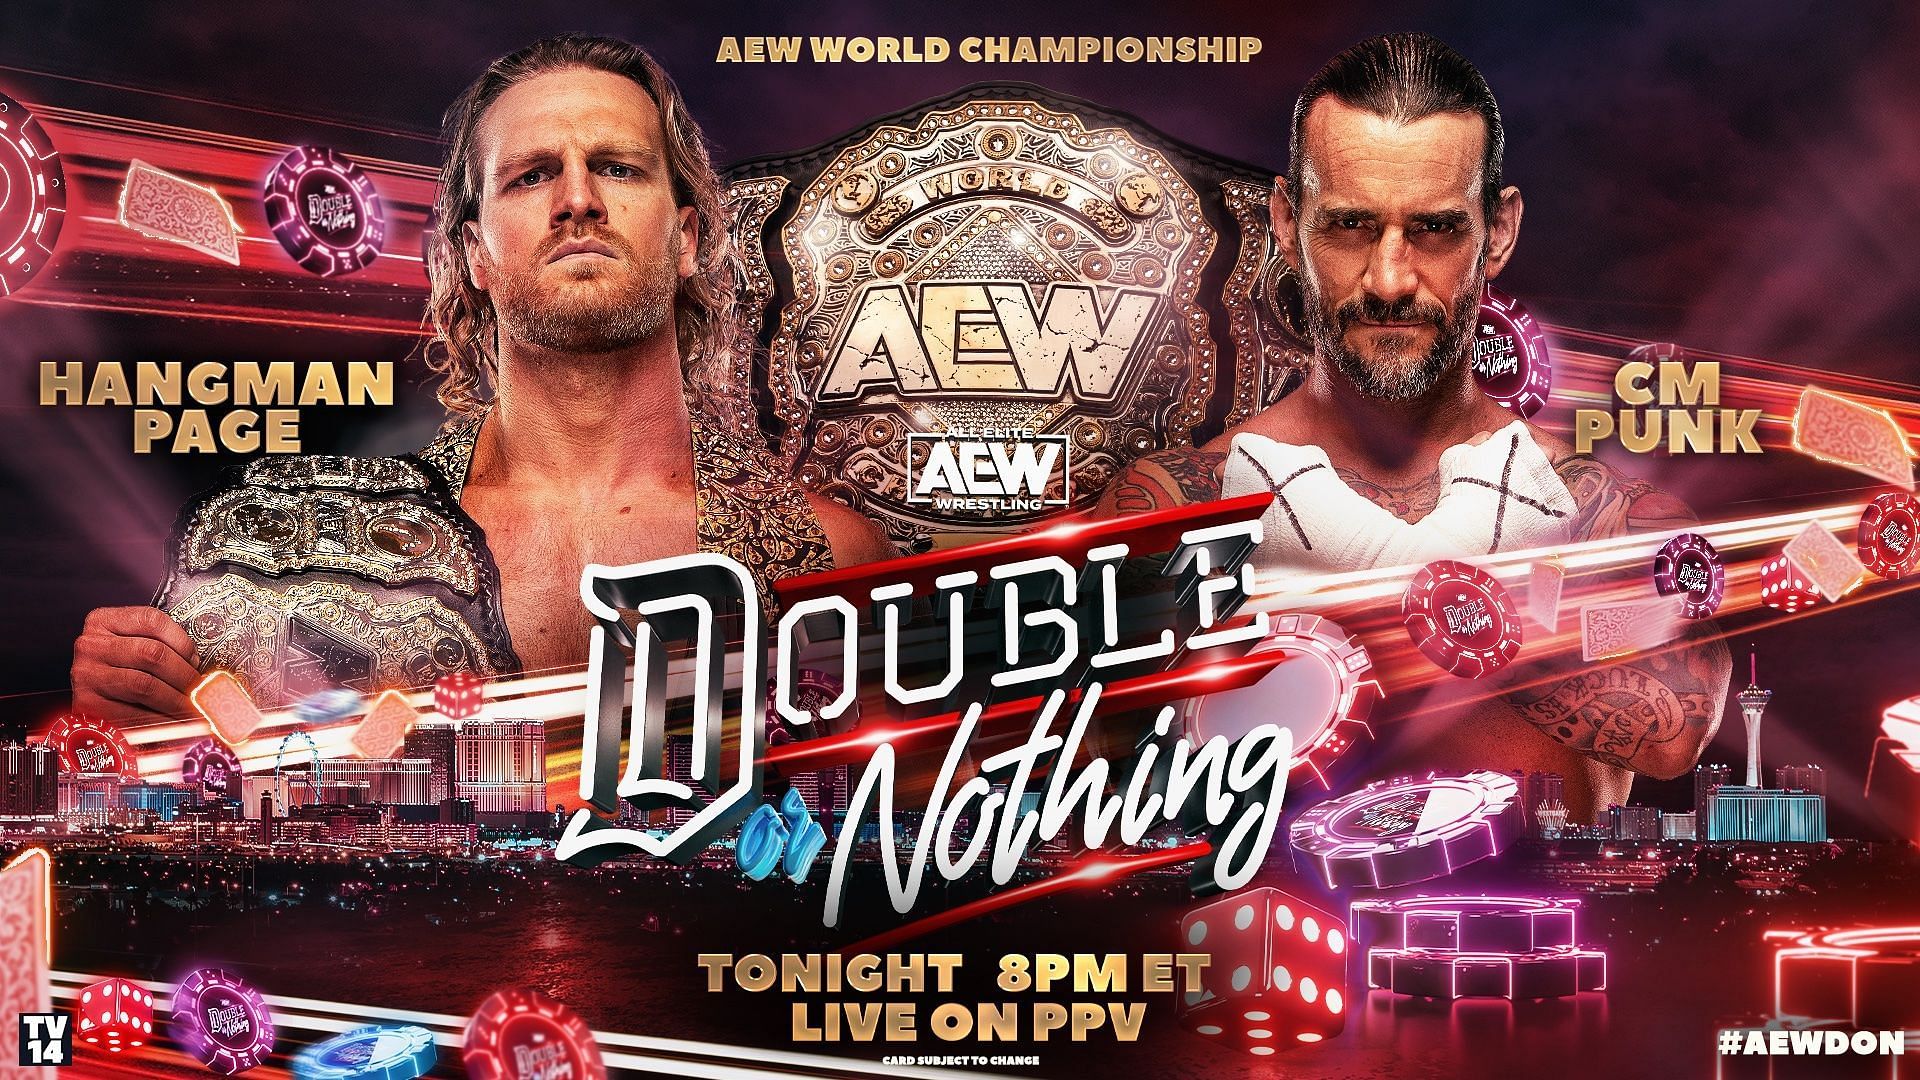 AEW Double or Nothing saw &quot;Hangman&quot; Adam Page face CM Punk for the AEW World Championship